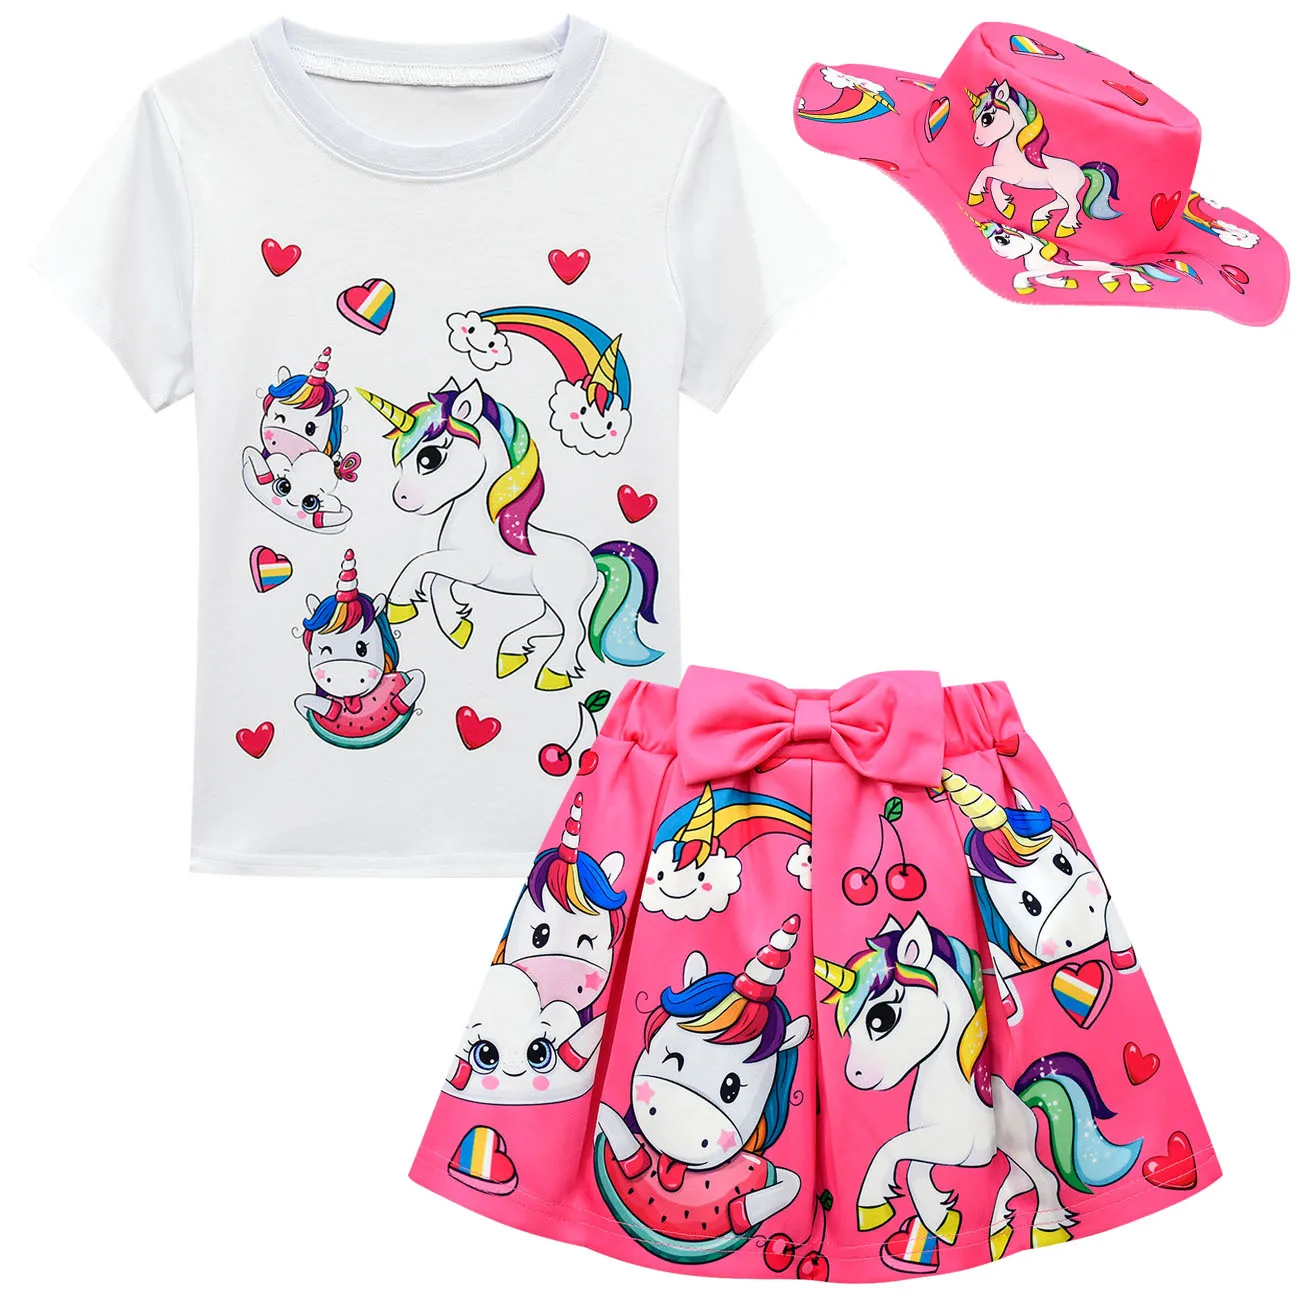 little kid suit Kids Unicorn Summer Tops Skirts Outfit Set Children Princess Party casual suit Girl Unicorn Rainbow love Clothes T-shir + Skirts newborn baby clothes set for hospital Clothing Sets